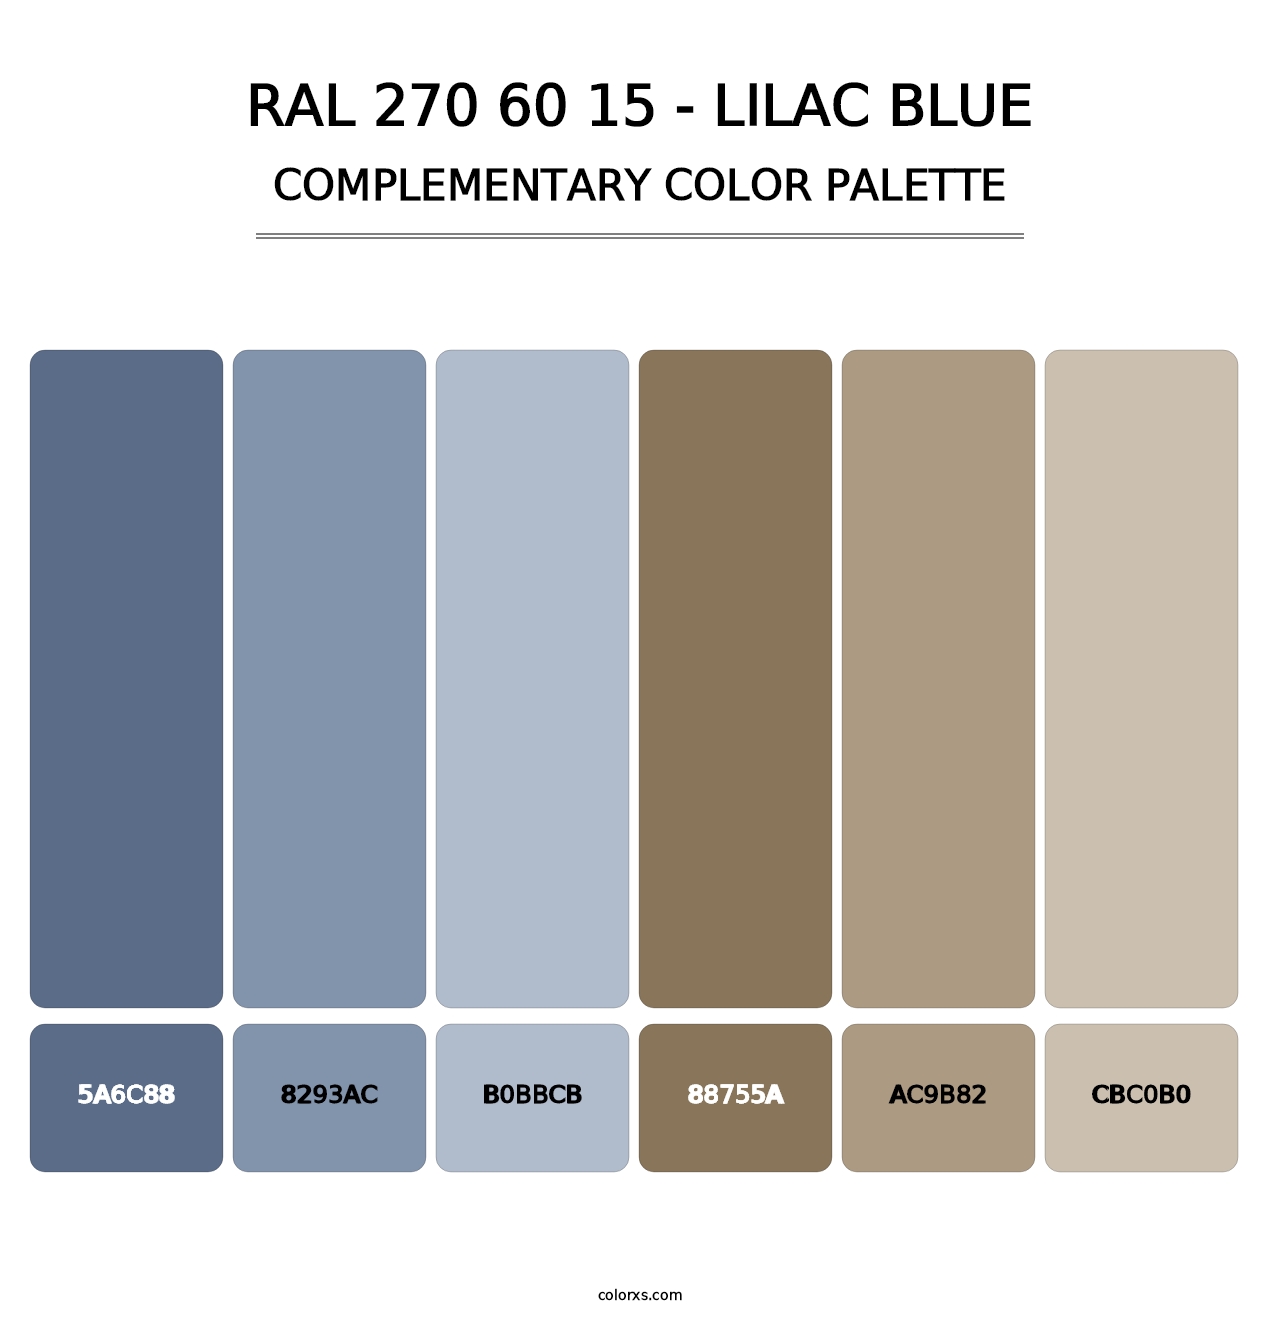 RAL 270 60 15 - Lilac Blue - Complementary Color Palette